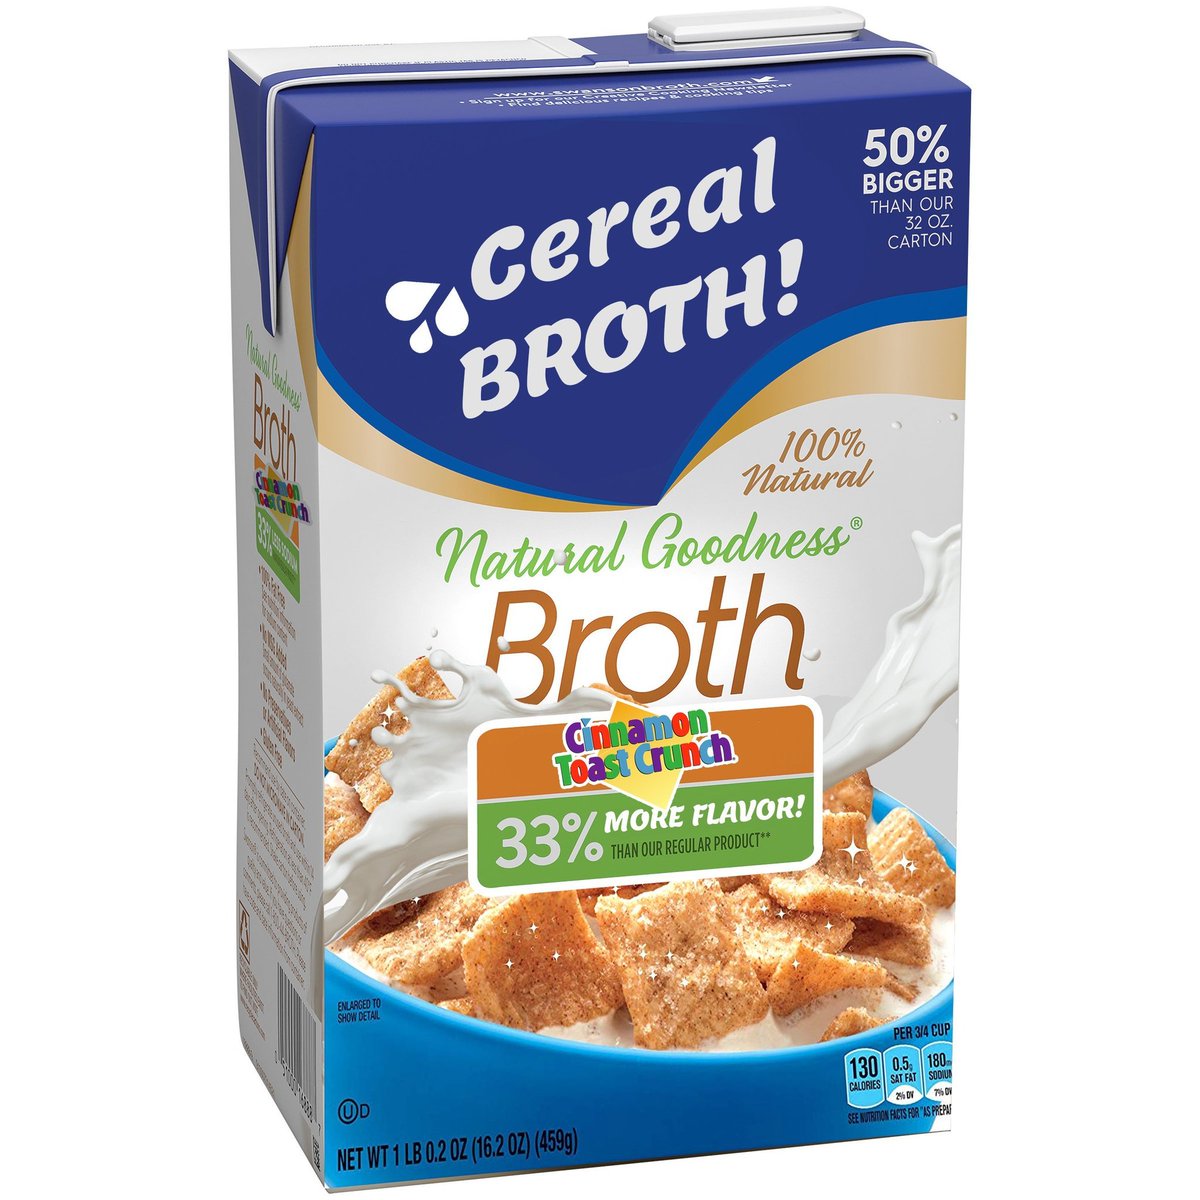 NEXTLETS TALK ABOUT CEREAL BROTH!It appears that world had taken to Cereal Broth by storm.And today we have some news regarding the Cereal Broth line.